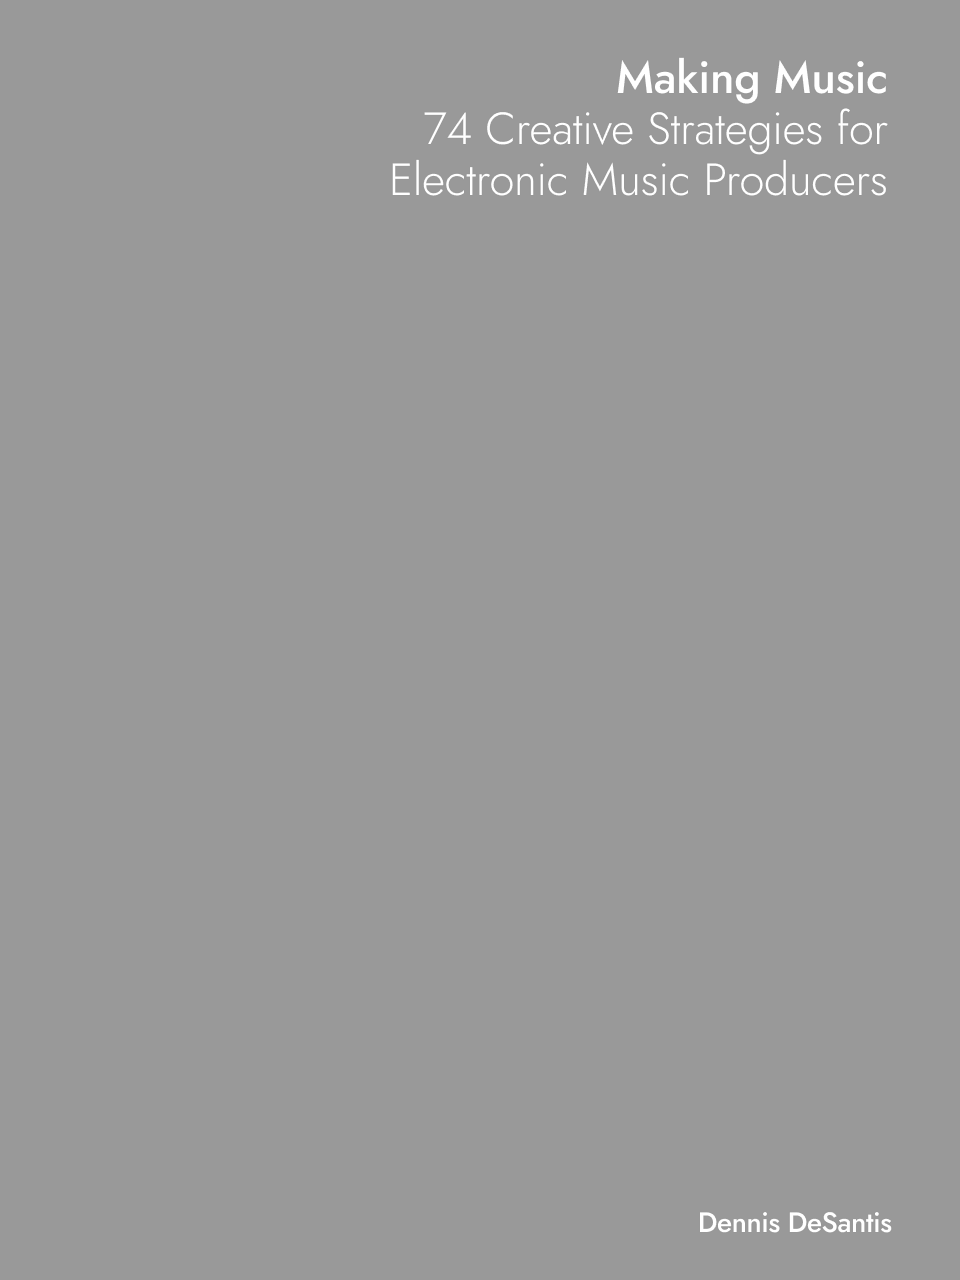 Making Music: 74 Creative Strategies for Electronic Music Producers by Dennis DeSantis finished on 2023 Jul 4